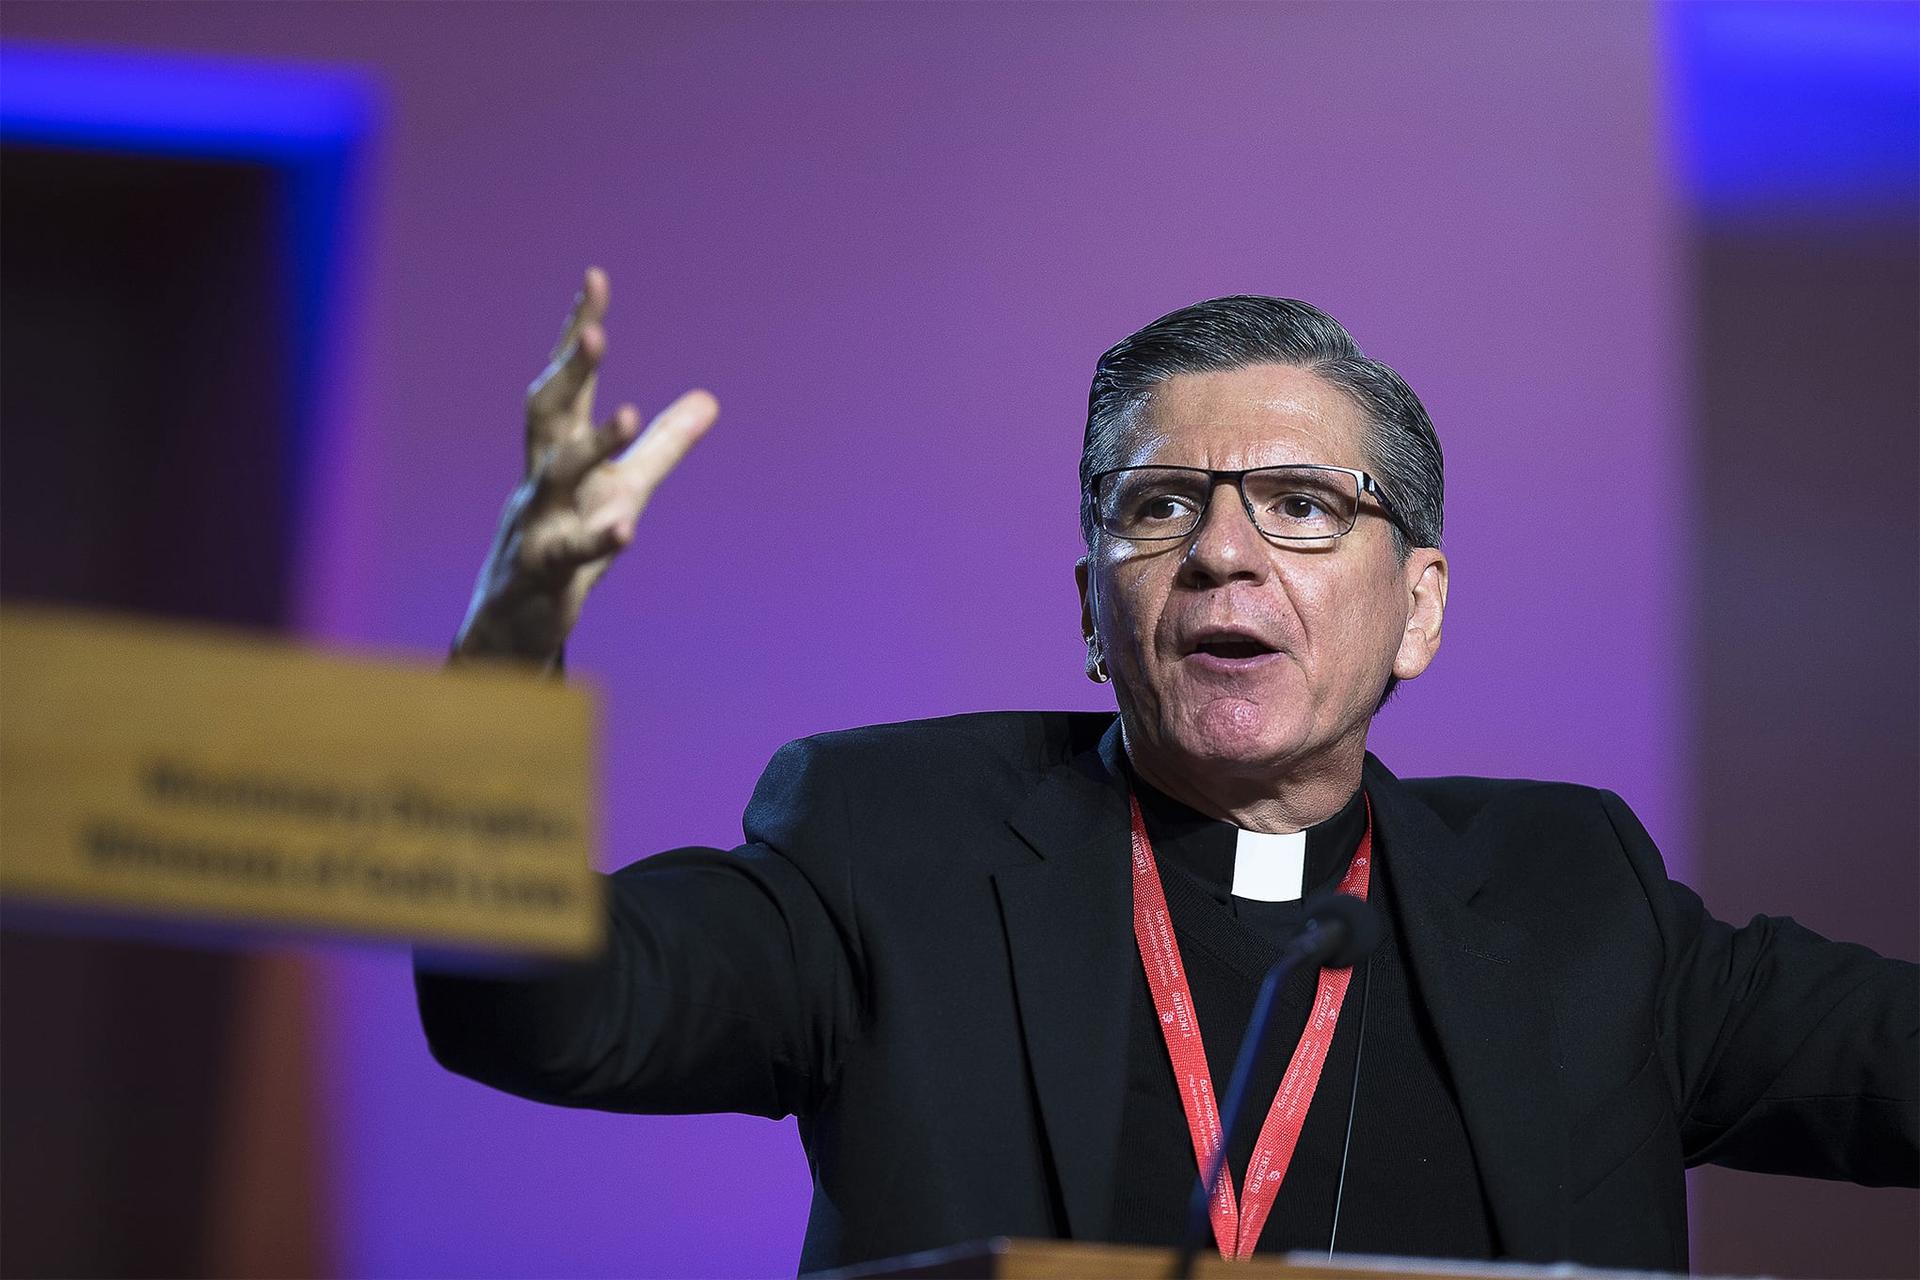 Texas prelate walks back criticism of Trump after shootings